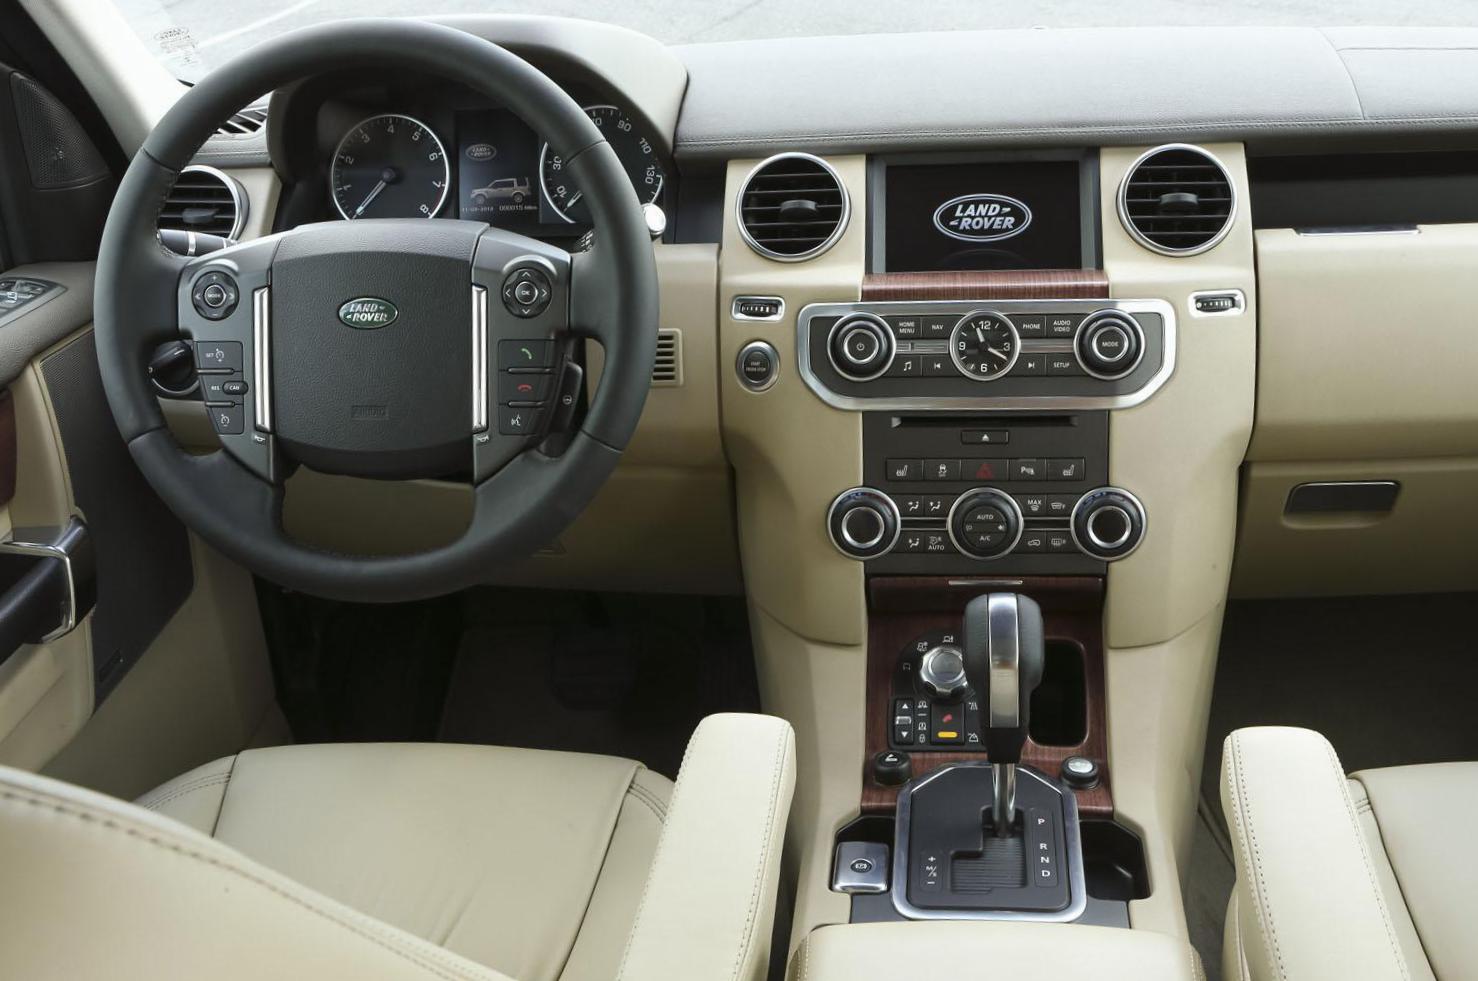 Discovery 4 Land Rover configuration 2009